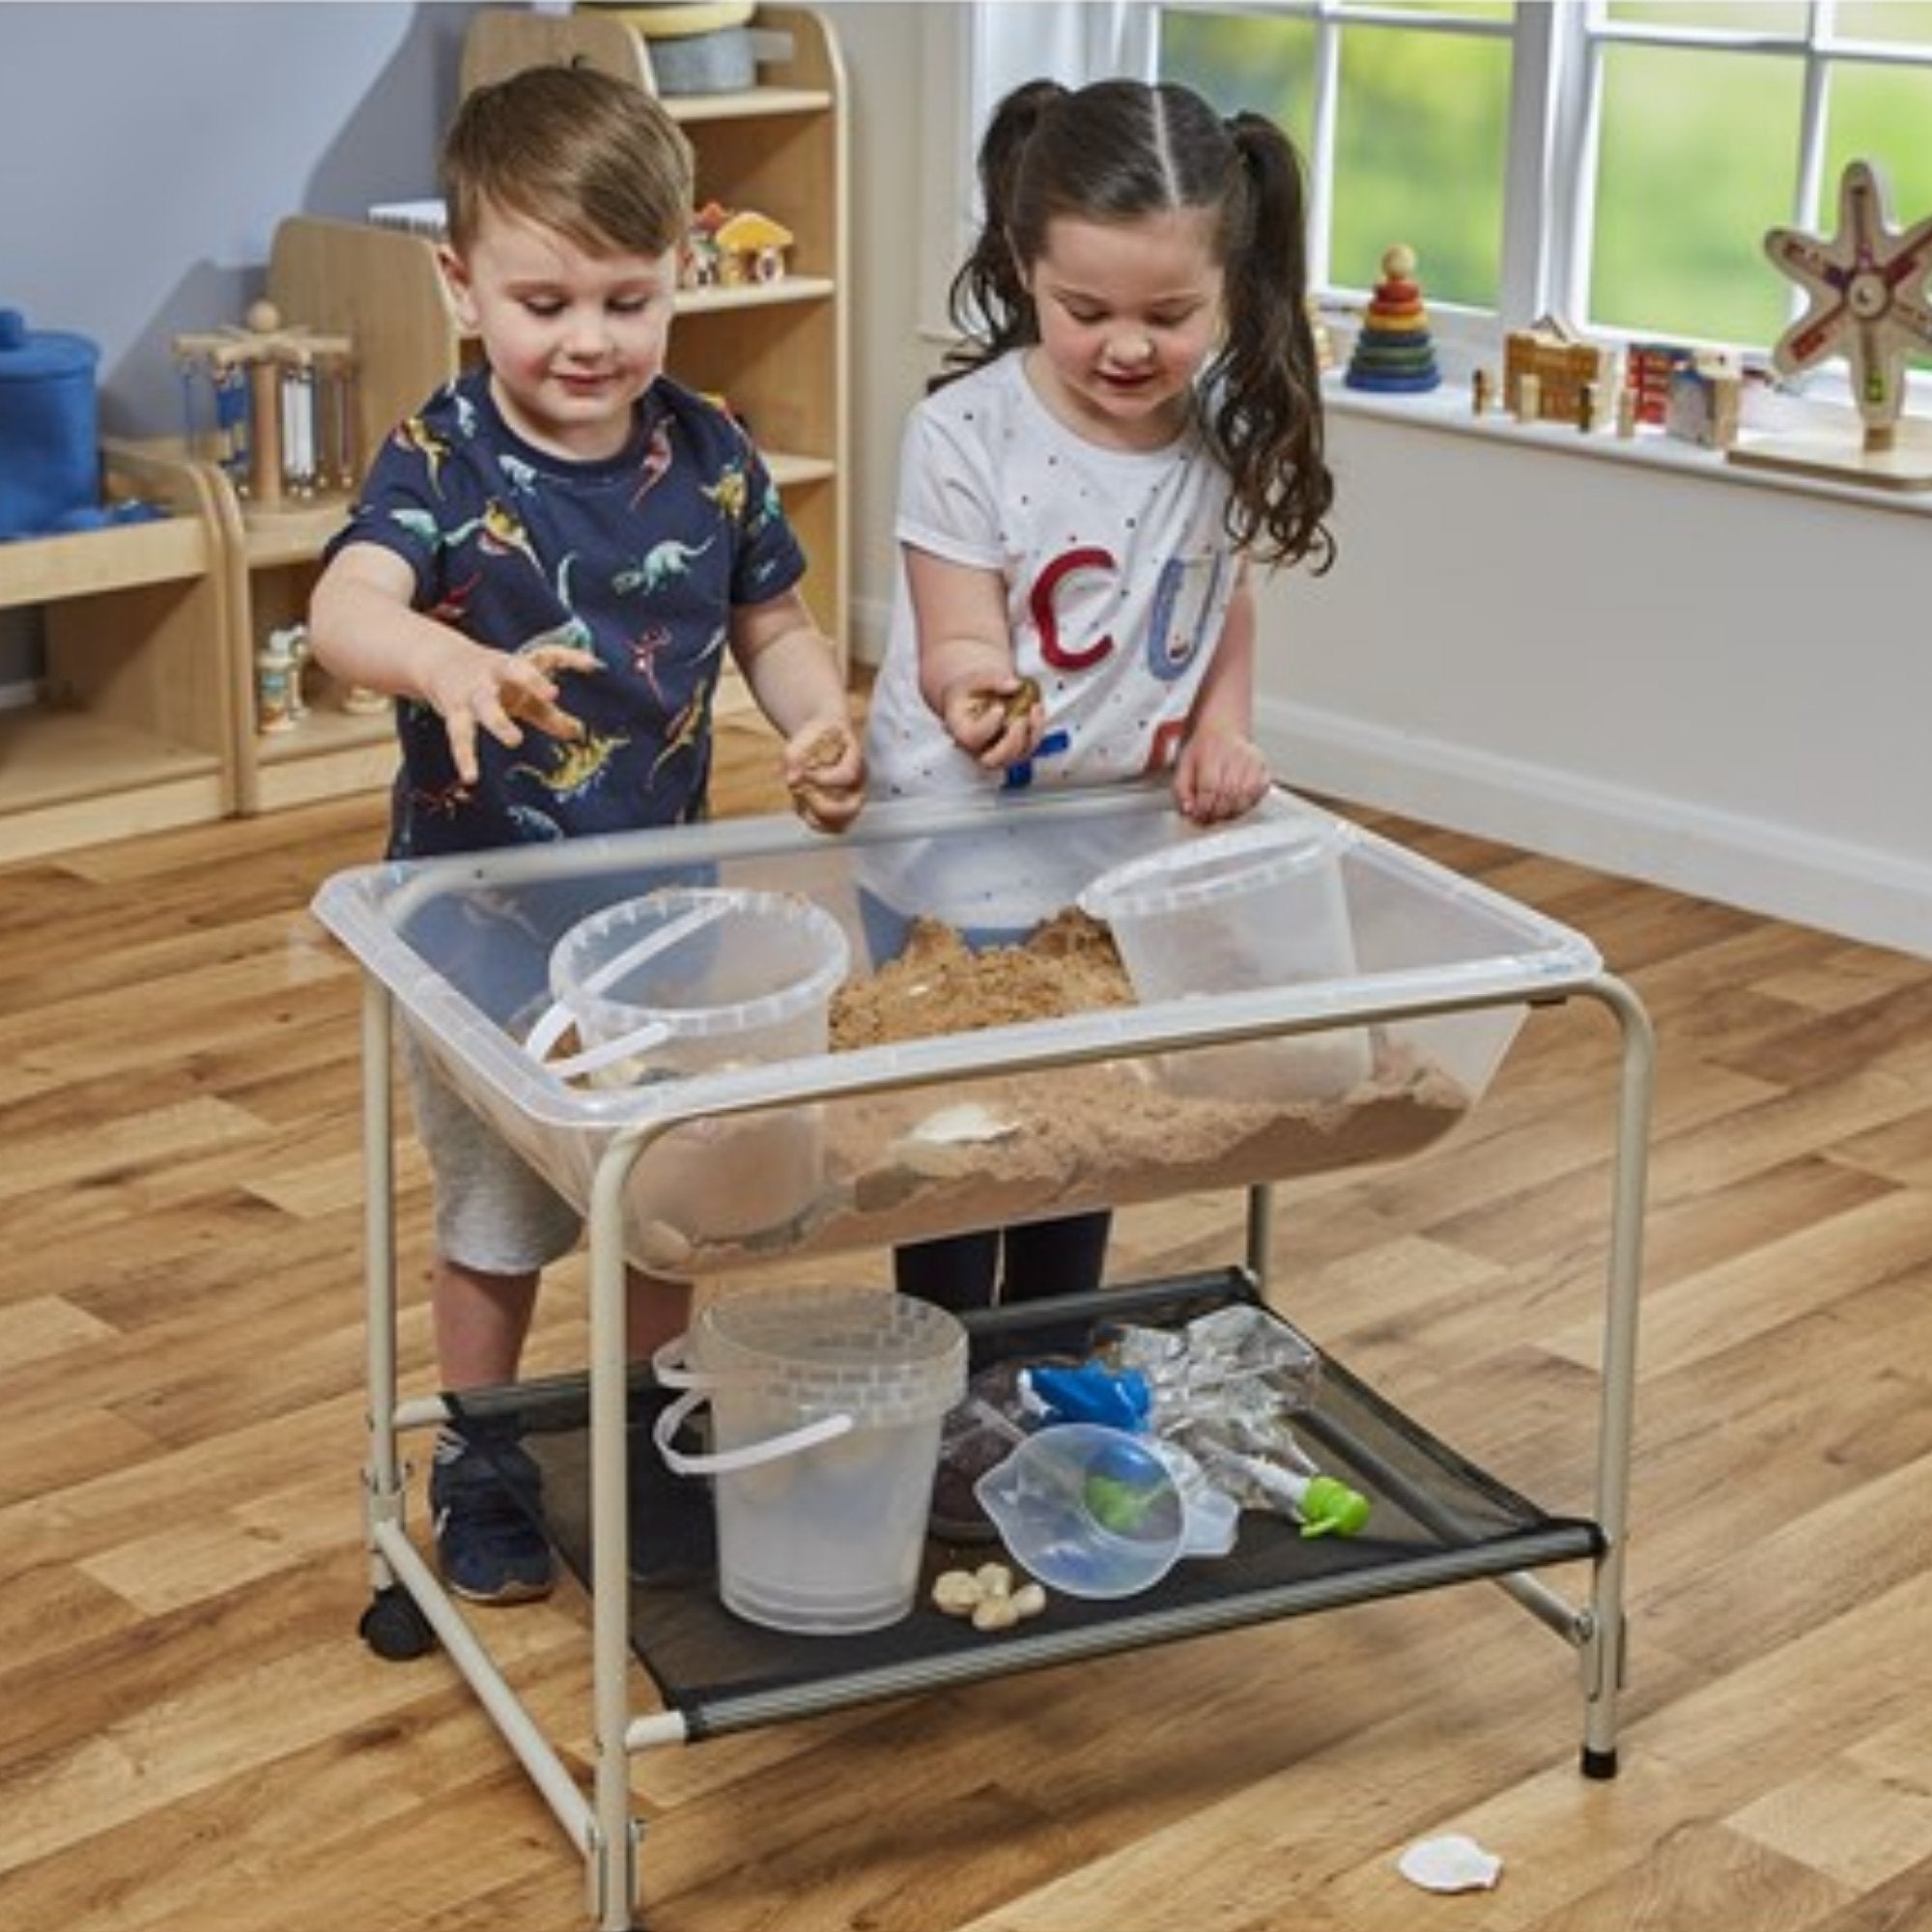 Clear Desktop Sand and Water Tray with Stand, Introducing the Clear Desktop Sand & Water Tray with Folding Sturdy Steel Stand, the perfect addition to any classroom or play area. This versatile tray is designed for endless hours of sensory play and exploration.Crafted from sturdy plastic material, the clear tray provides a captivating view of the contents inside, while ensuring durability and resistance to wear and tear. The steel stand with powder-coated frames adds a touch of robustness to the table, ensu